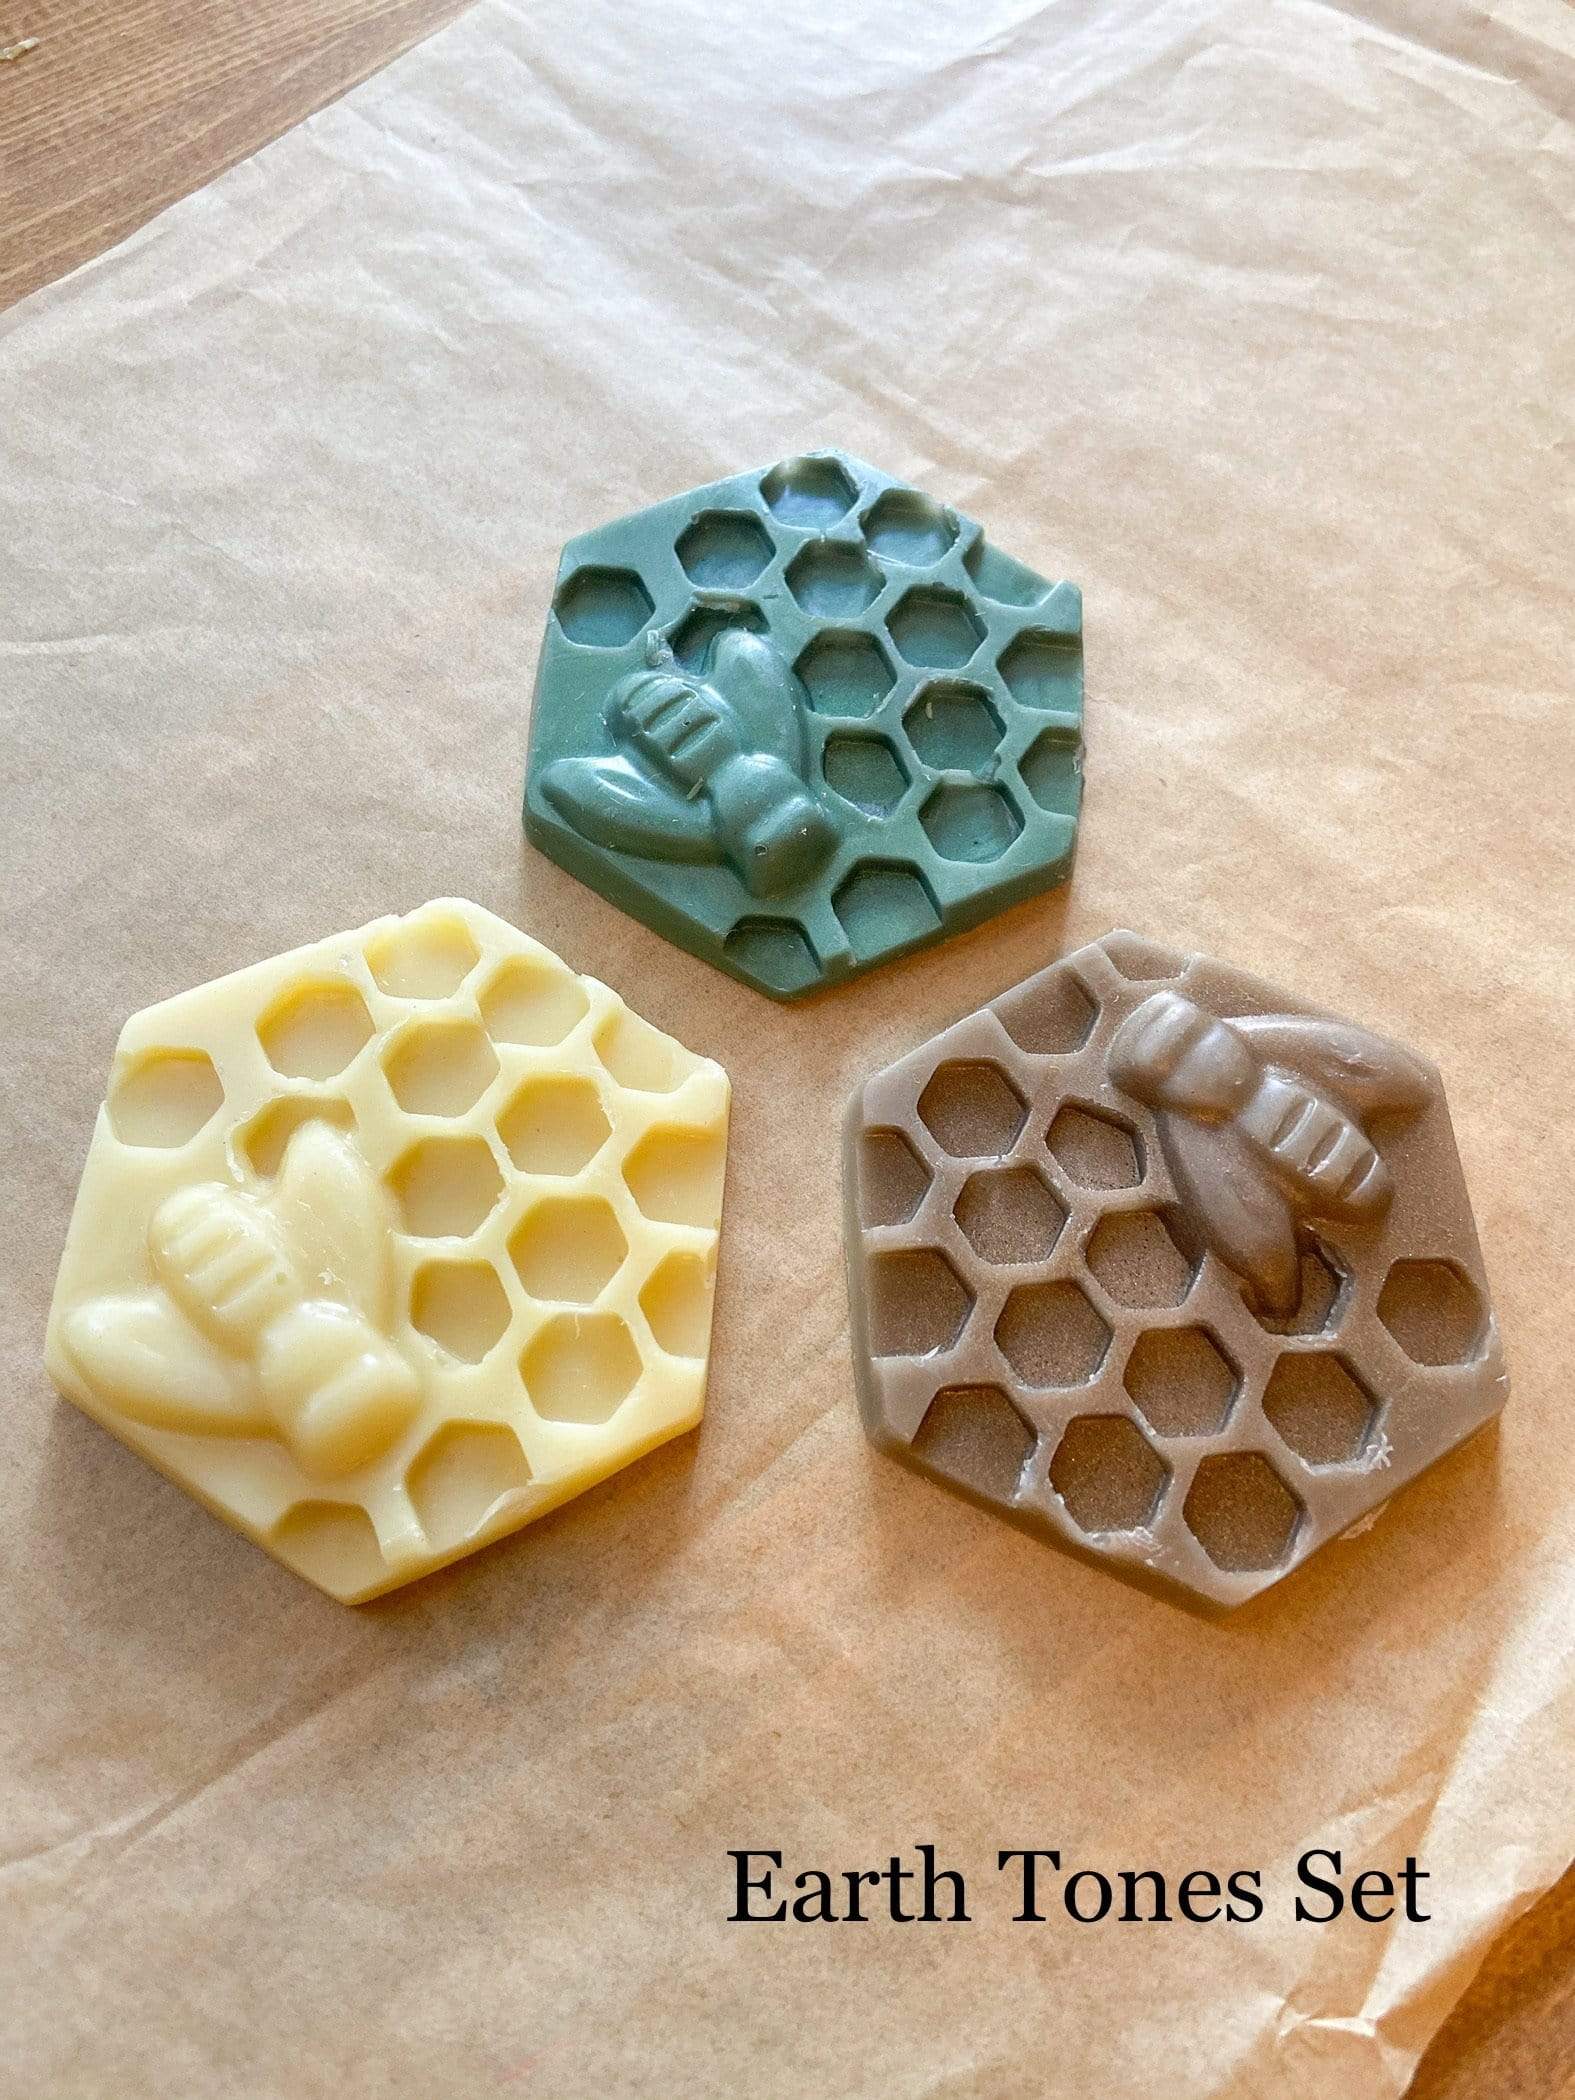 Beeswax Modeling Clay